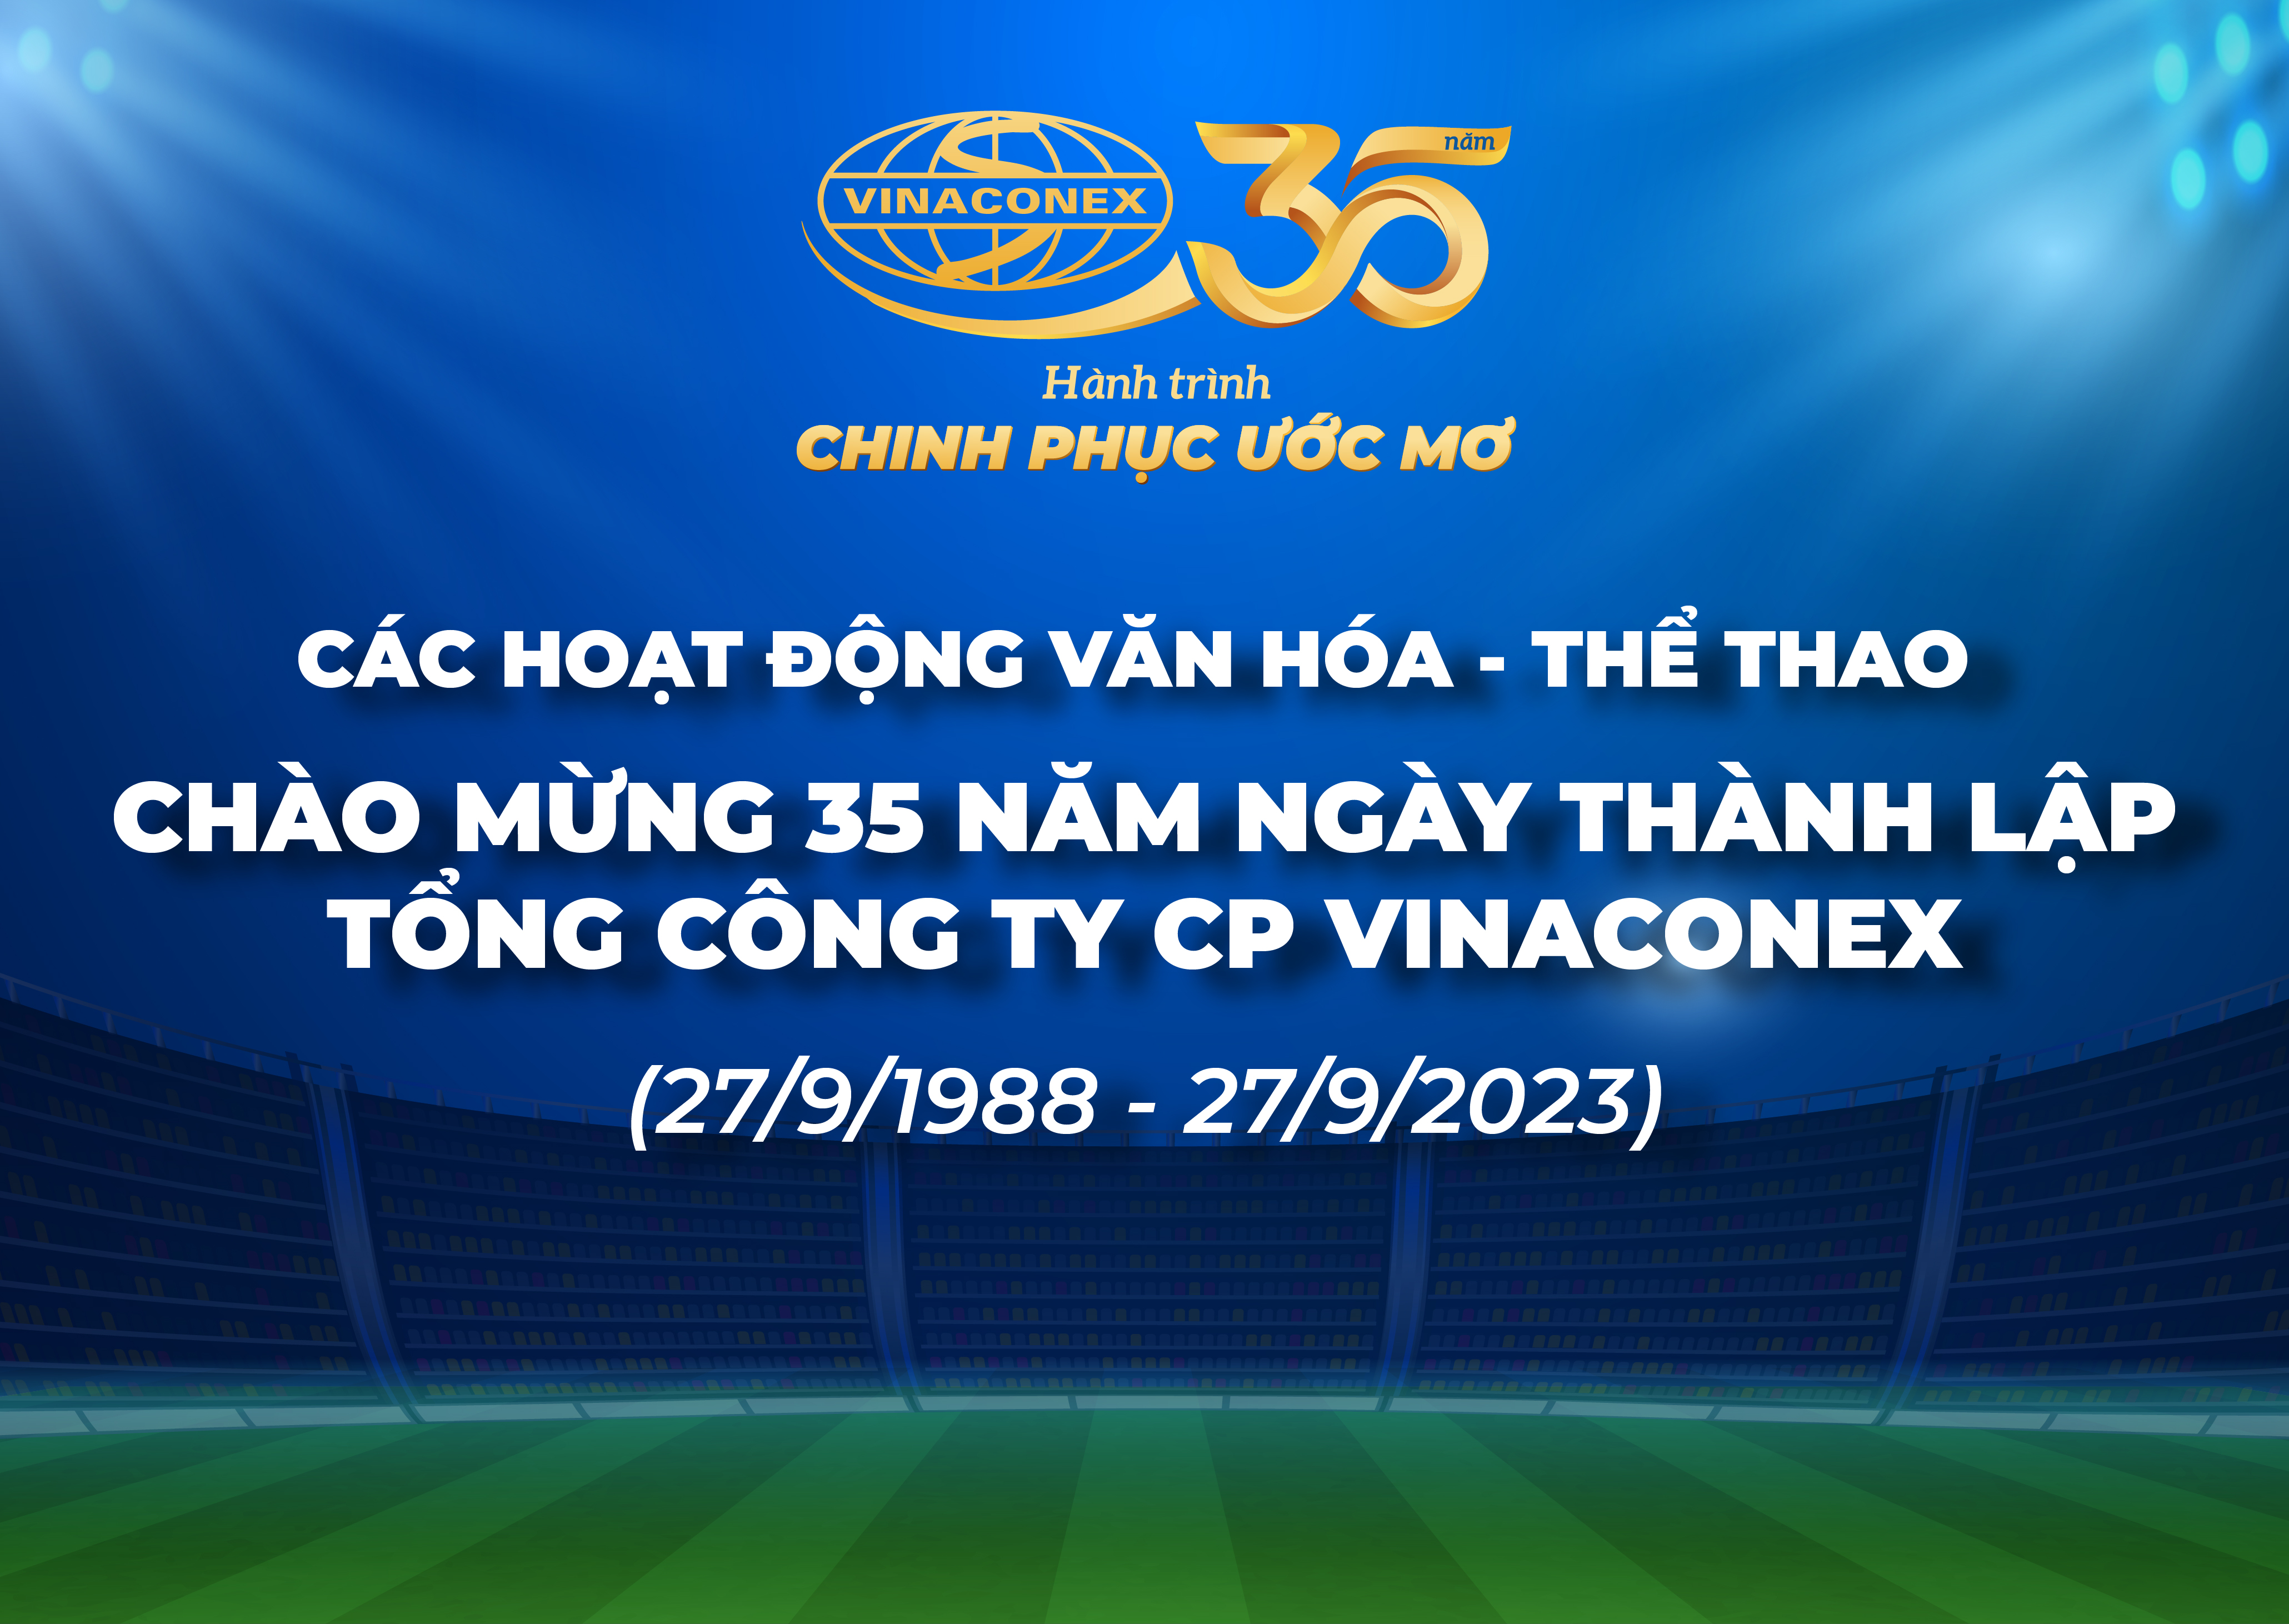 CULTURAL AND SPORTS ACTIVITIES CELEBRATING THE 35TH ANNIVERSARY OF VINACONEX CORPORATION’S ESTABLISHMENT (SEPTEMBER 27, 1988 - SEPTEMBER 27, 2023)